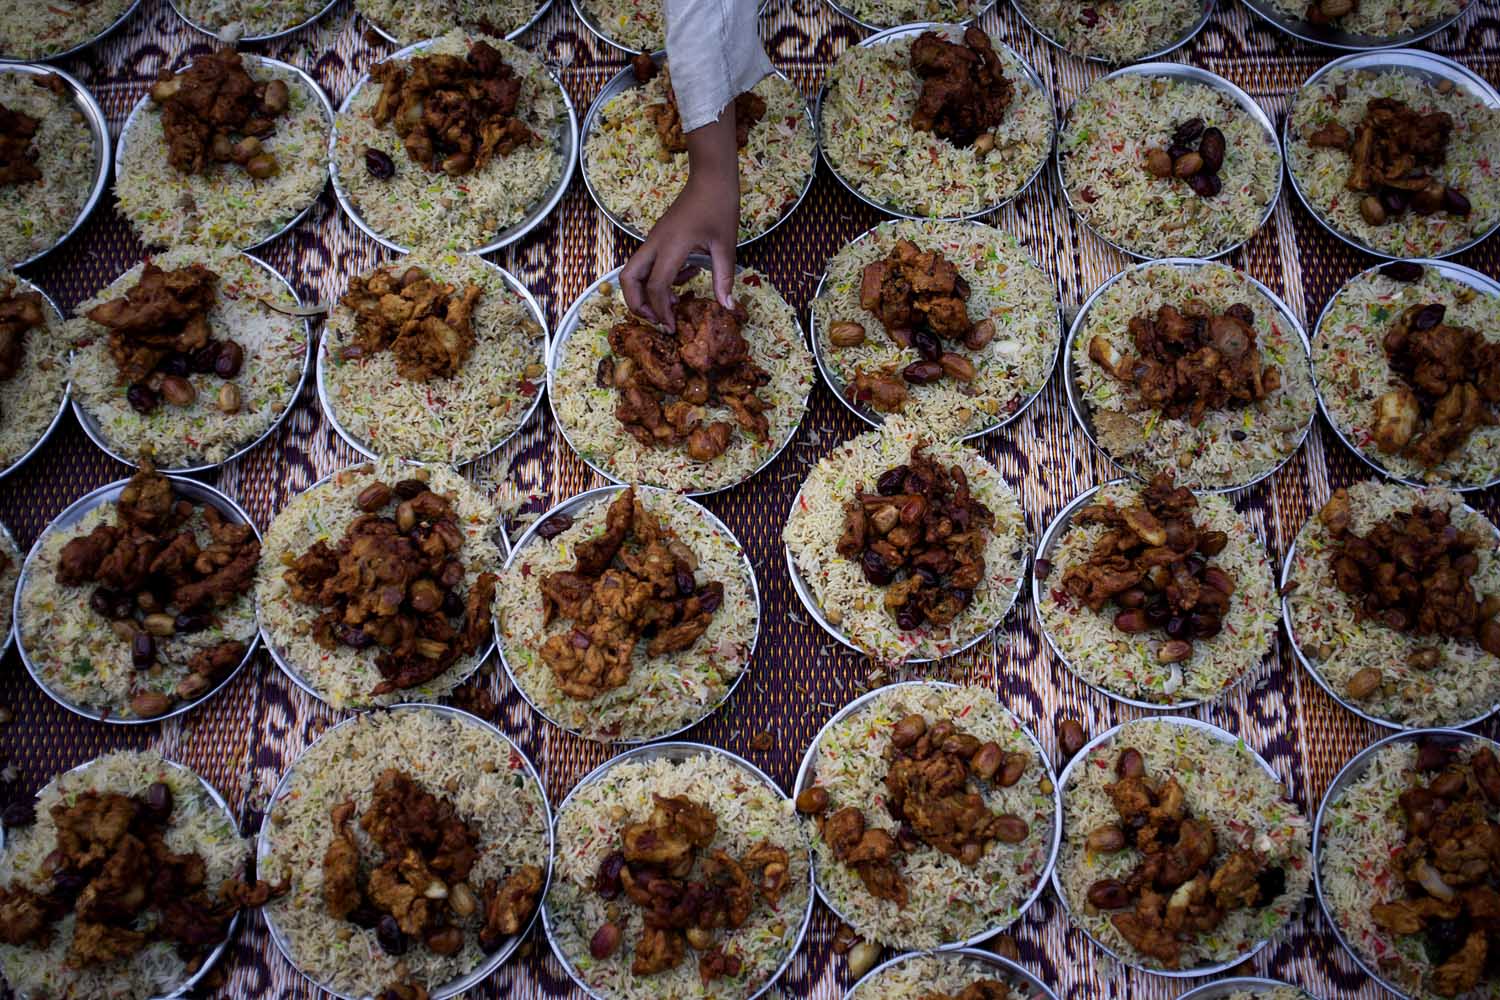 July 30, 2013. A Pakistani boy arranges plates of food for Iftar, the meal that breaks the day's fast, during the holy month of Ramadan at a roadside in Islamabad.